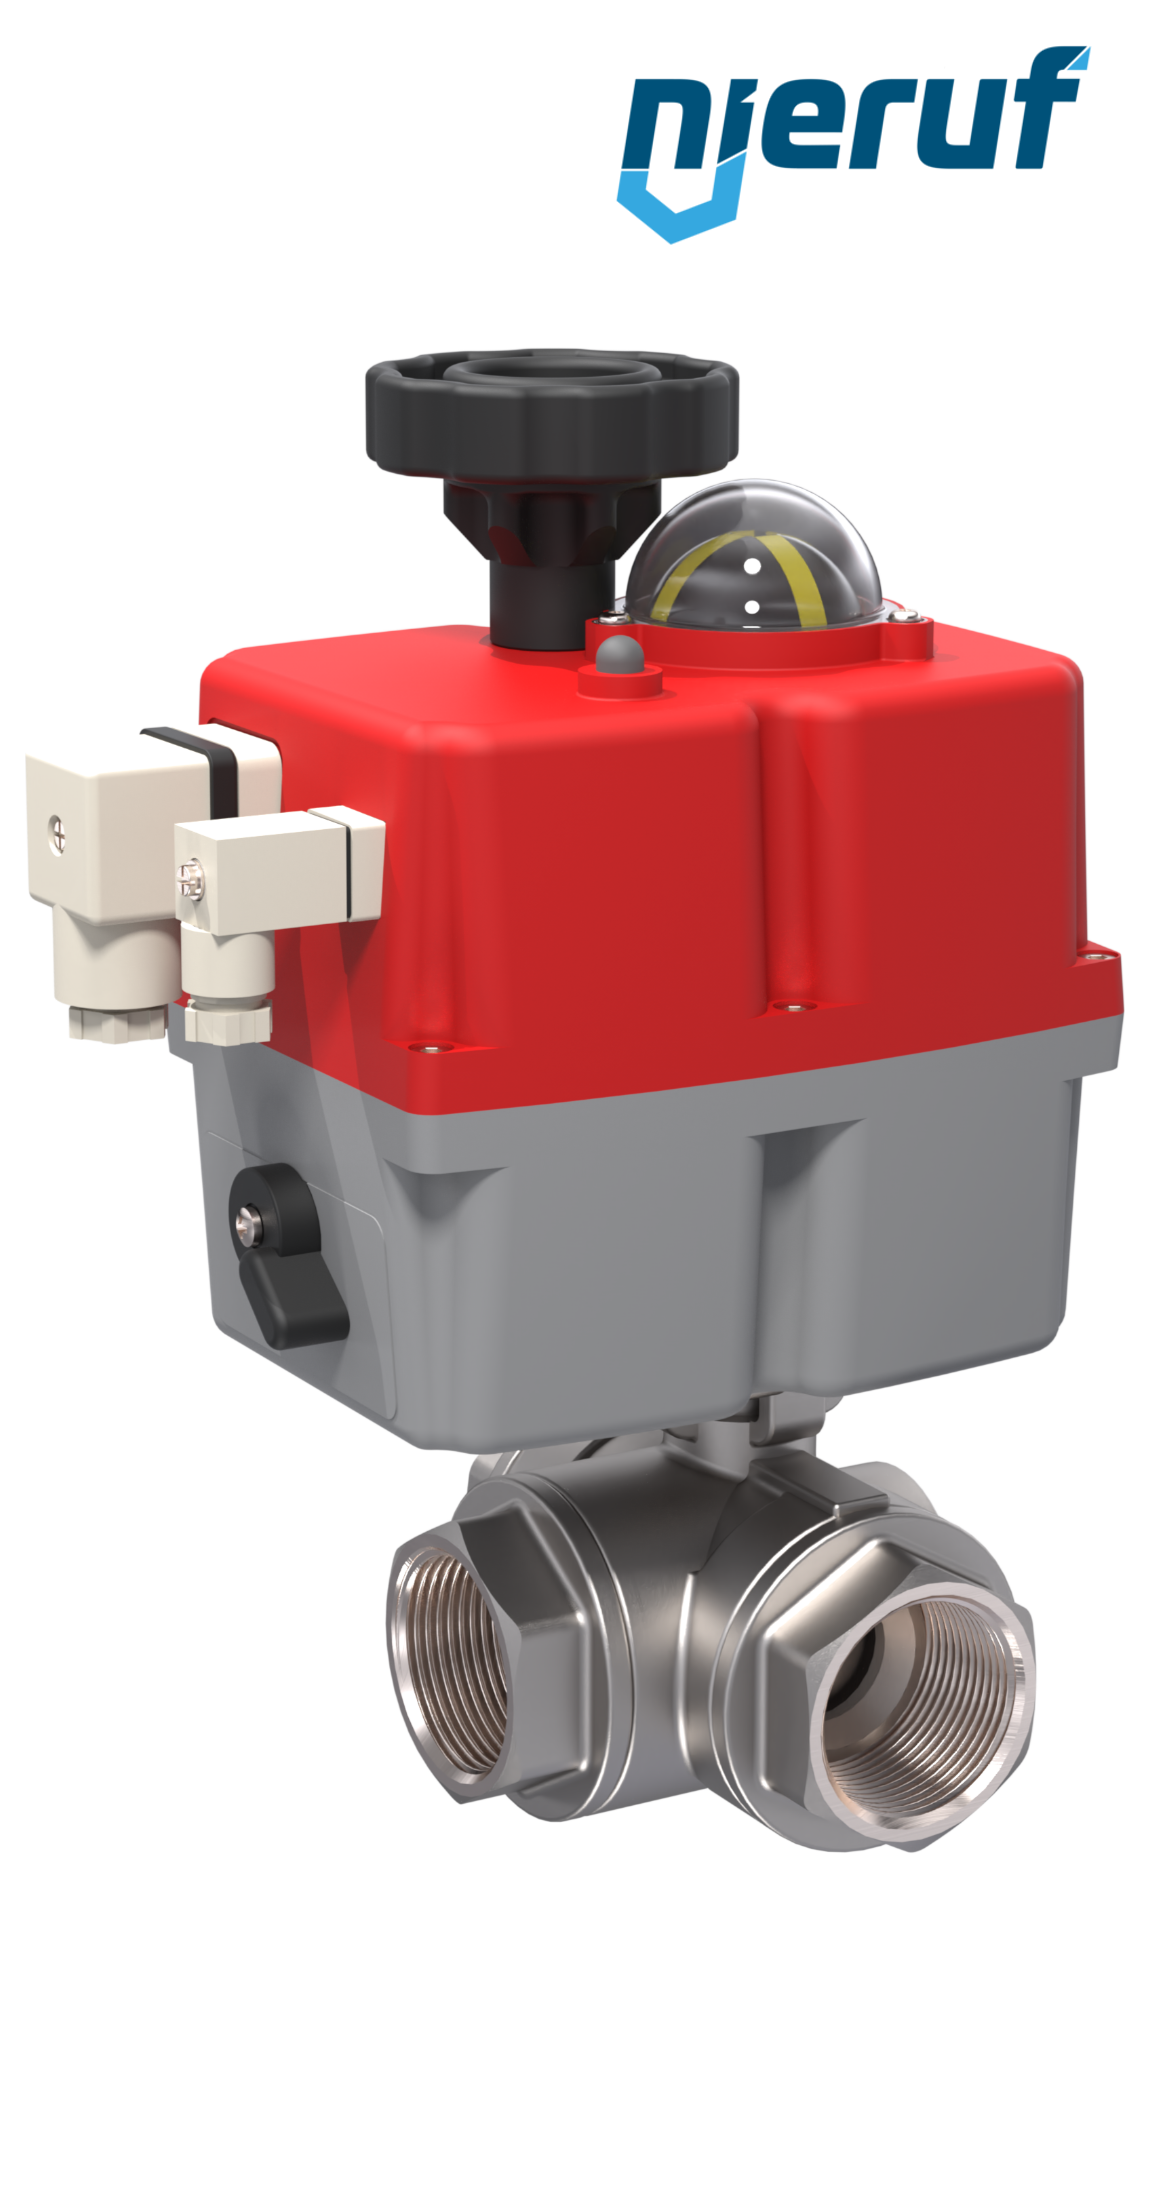 3 way automatic-ball valve 24-240V DN32 - 1 1/4" inch stainless steel reduced port design with L drilling